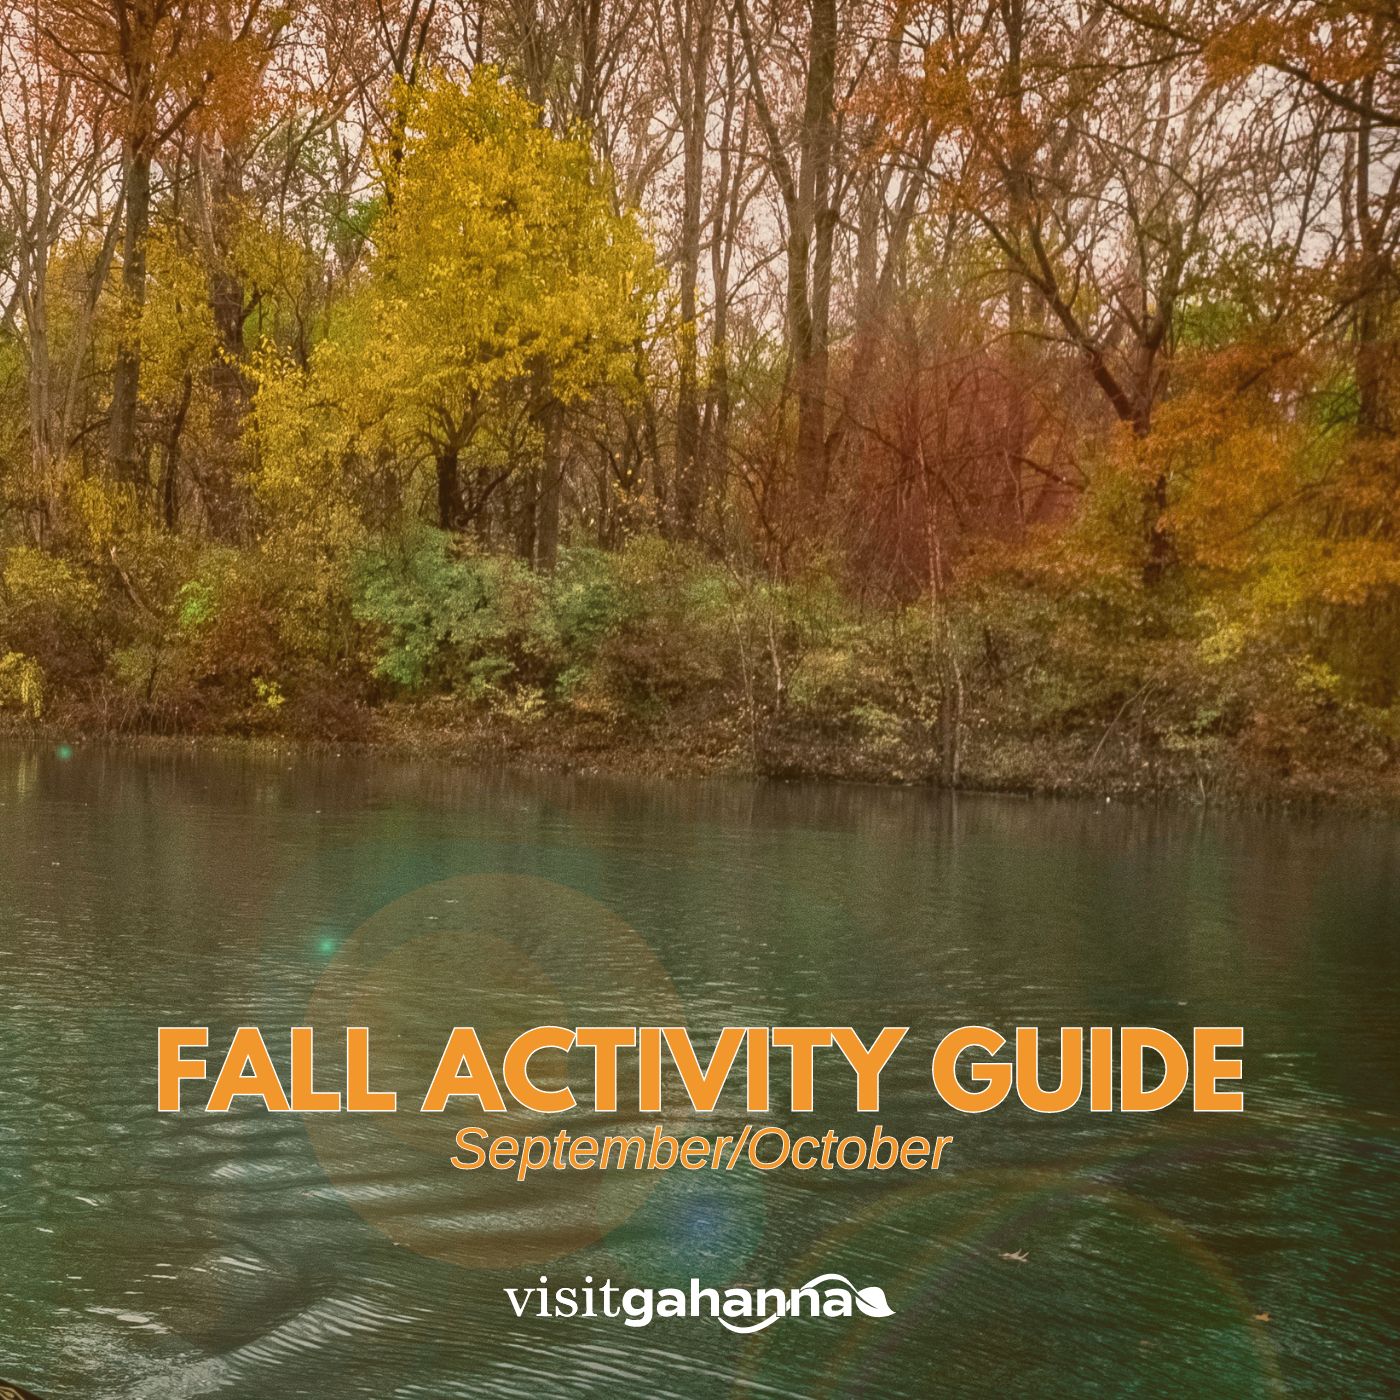 Fall Activity Guide: Things To Do In Gahanna This Fall Season